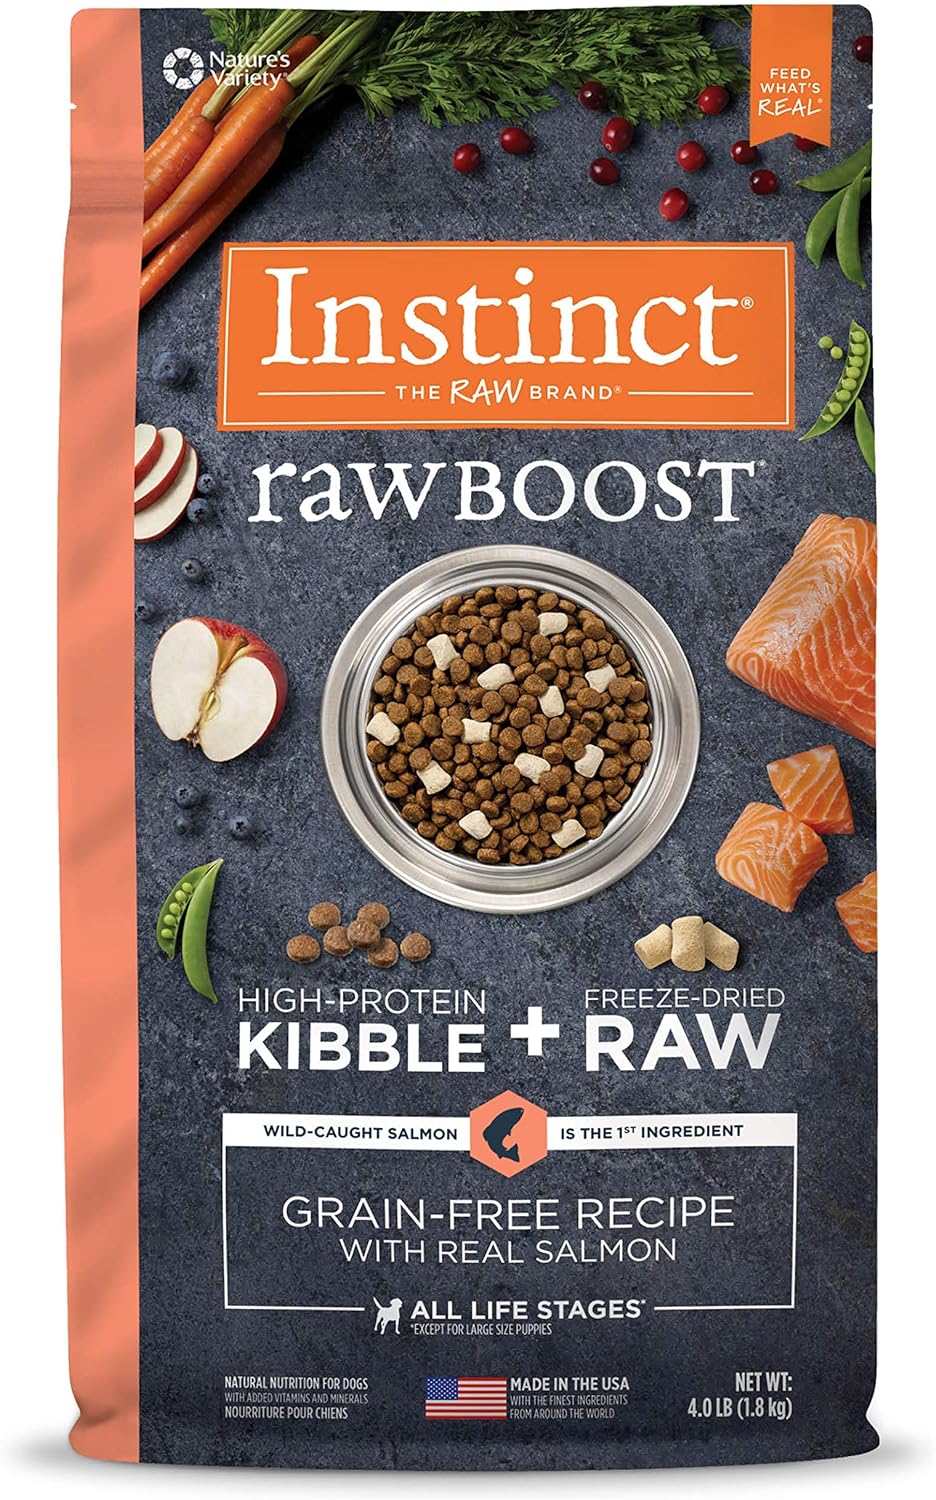 Instinct Raw Boost Grain Free Recipe with Real Salmon Natural Dry Dog Food by Nature's Variety, 4 lb. Bag